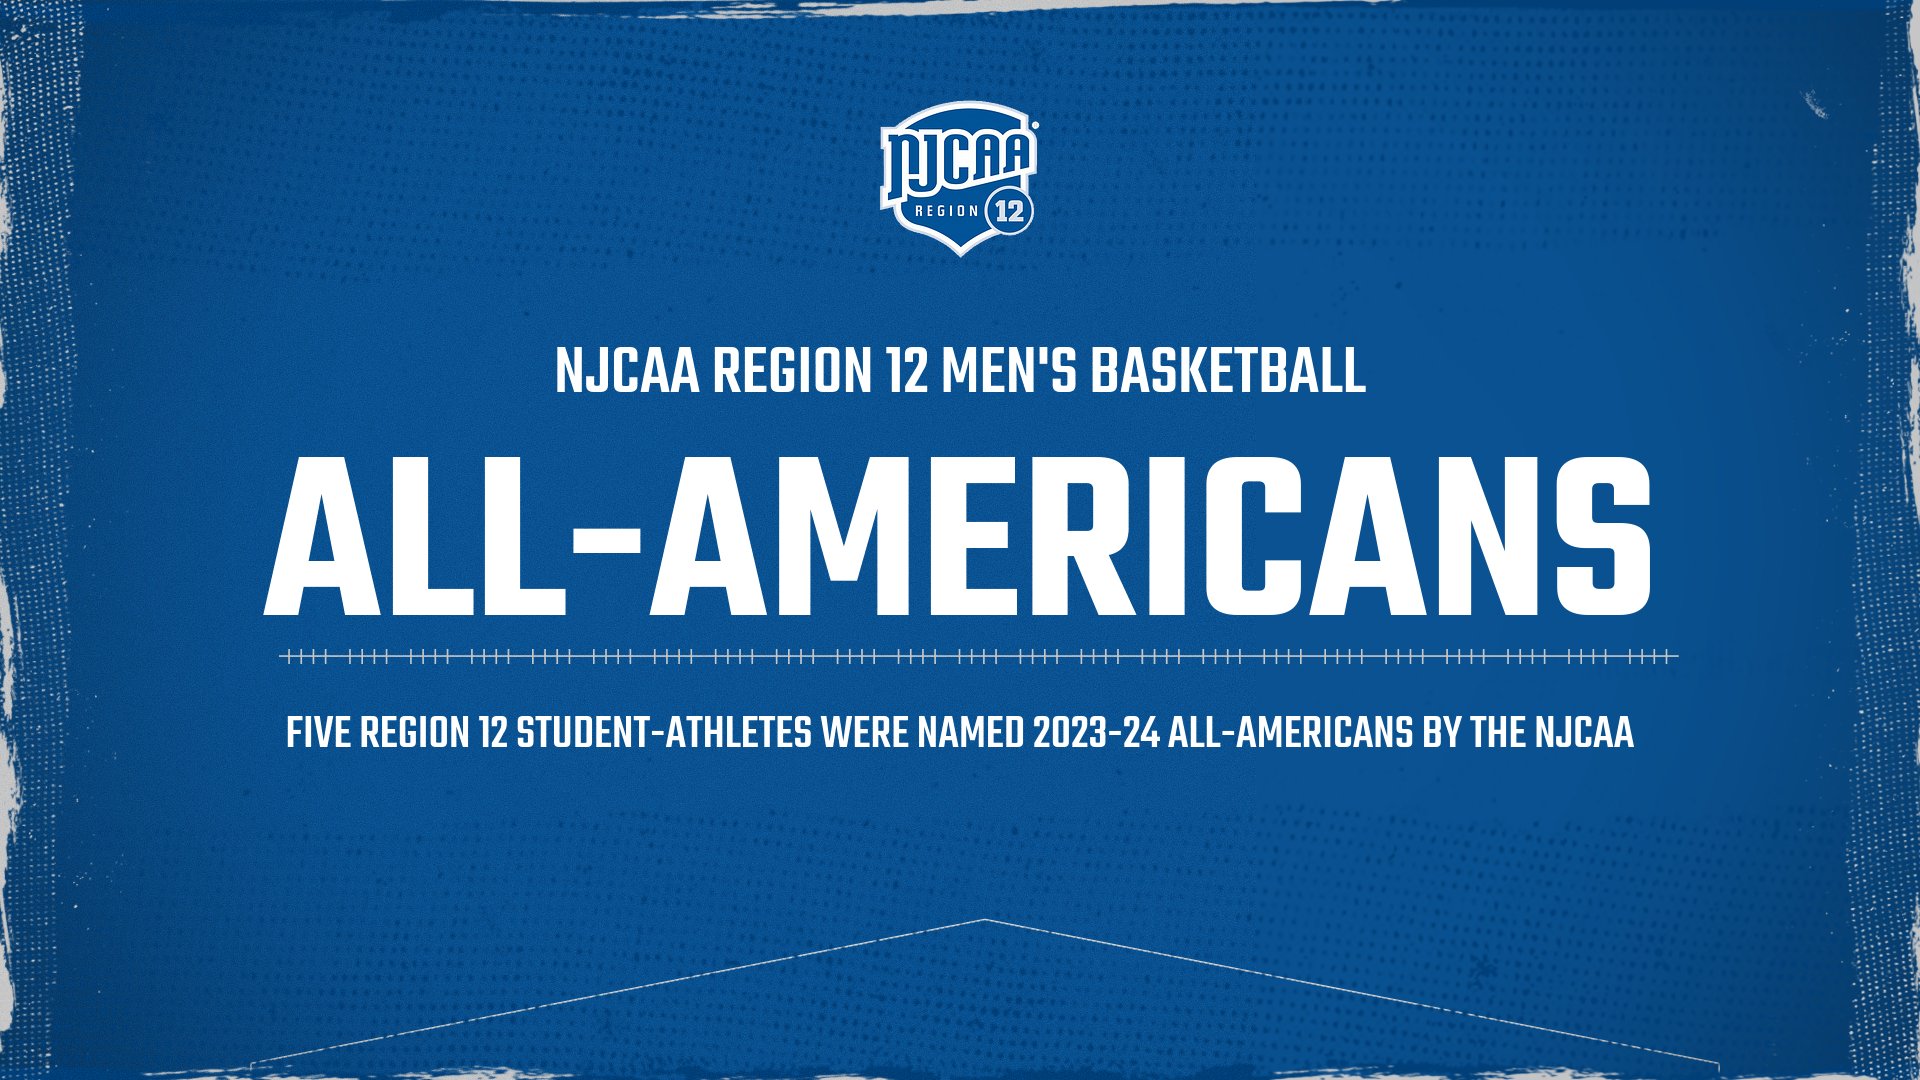 NJCAA Announces Men’s Basketball All-Americans, Five Region 12 Student-Athletes Recognized